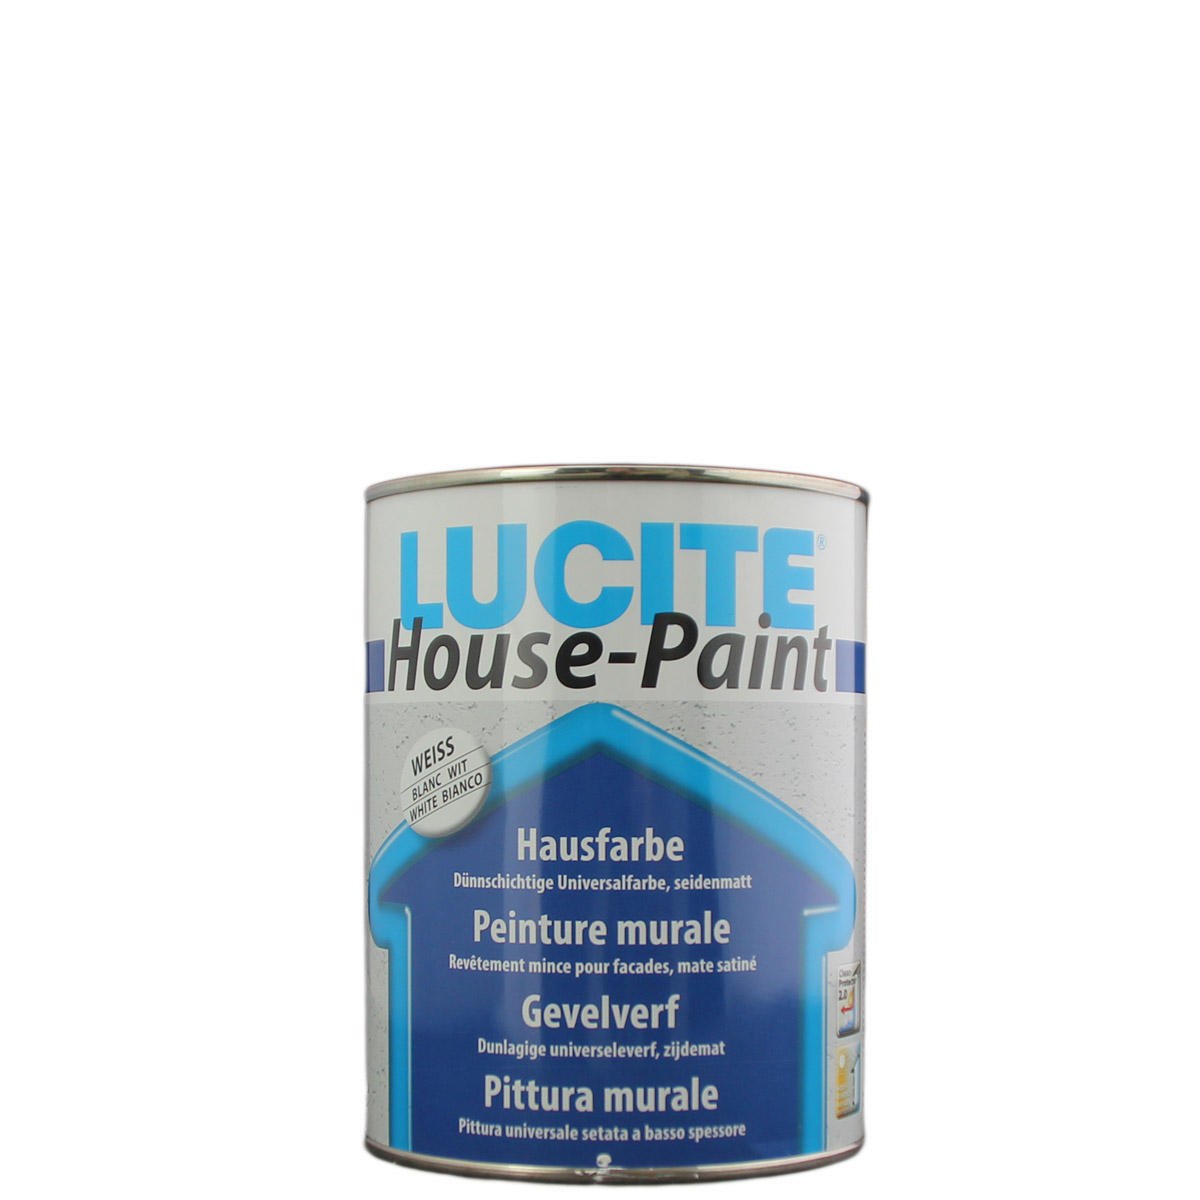 Lucite House Paint 1L weiss 1000T, Hausfarbe, Fassadenfarbe